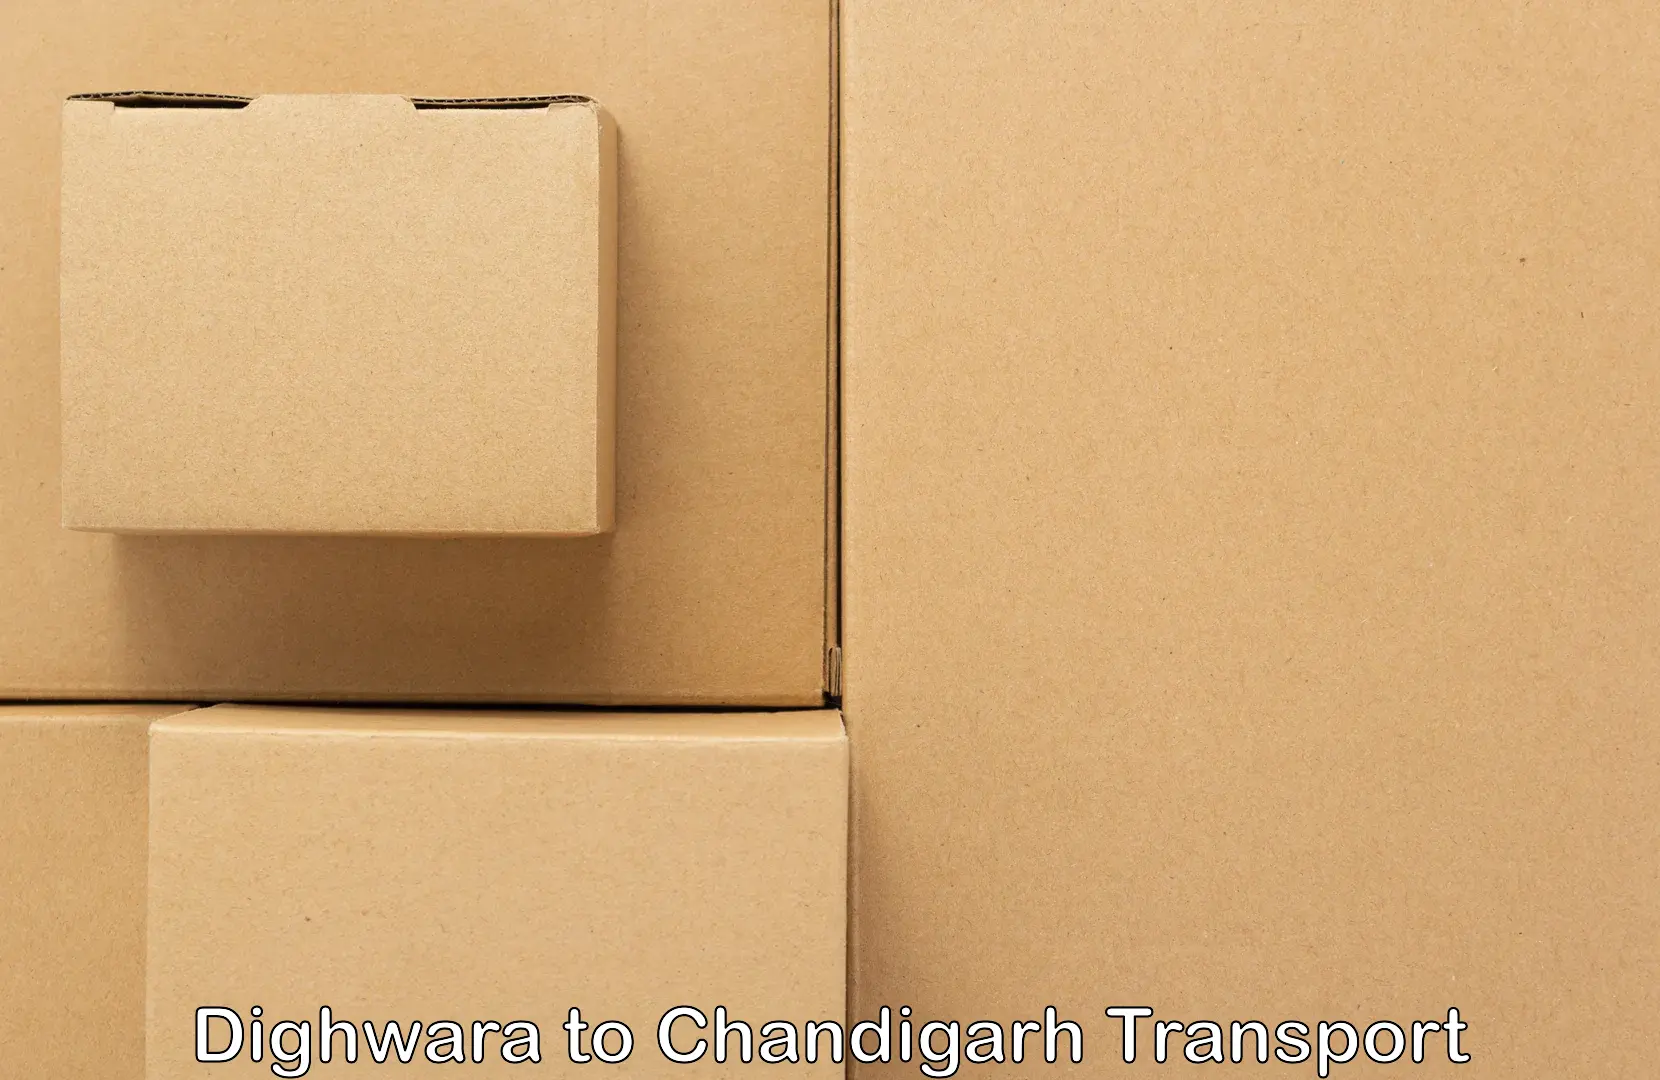 Delivery service Dighwara to Chandigarh